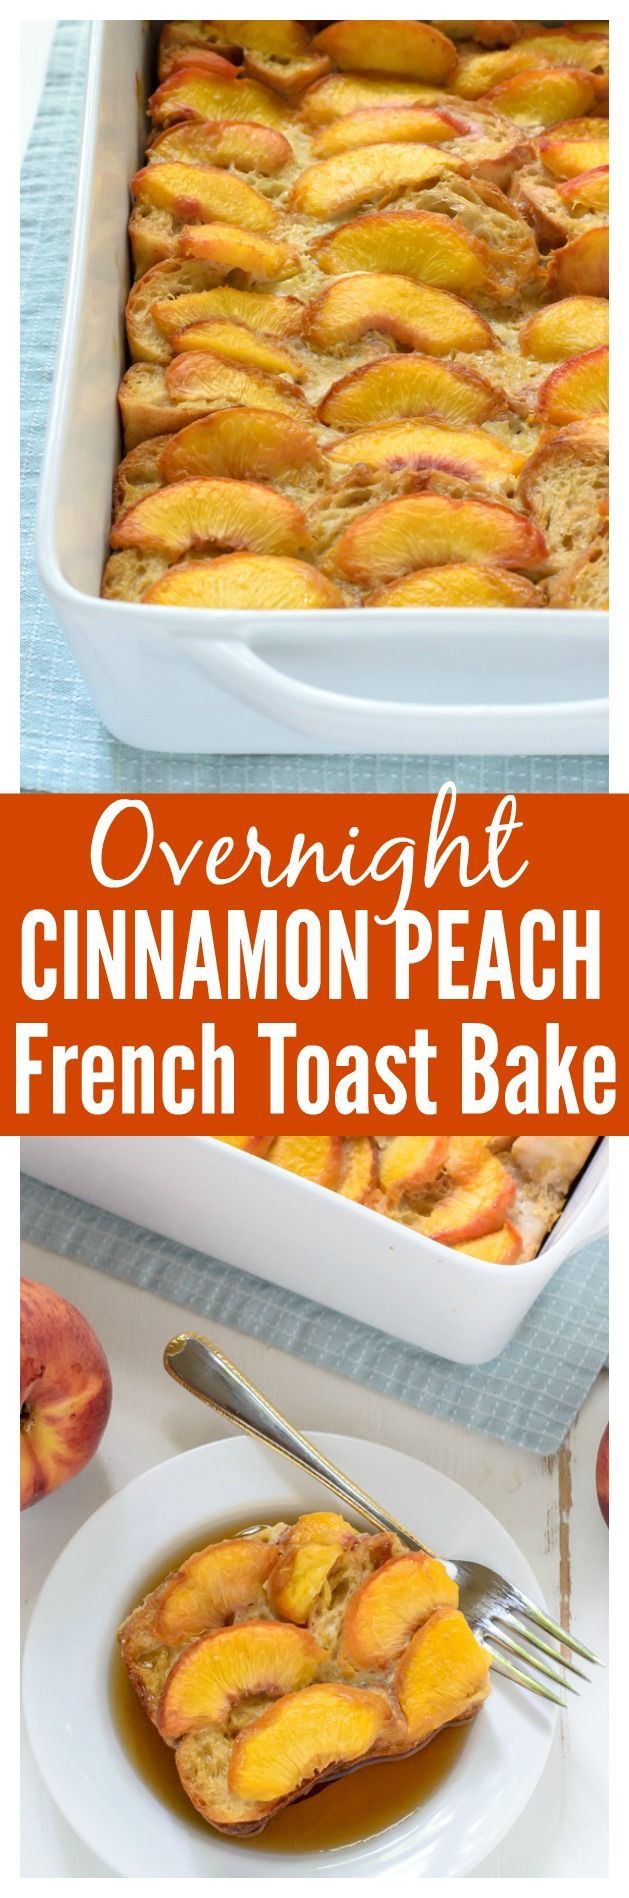 Overnight Cinnamon Peach French Toast Bake – easy and great for group breakfast / guests